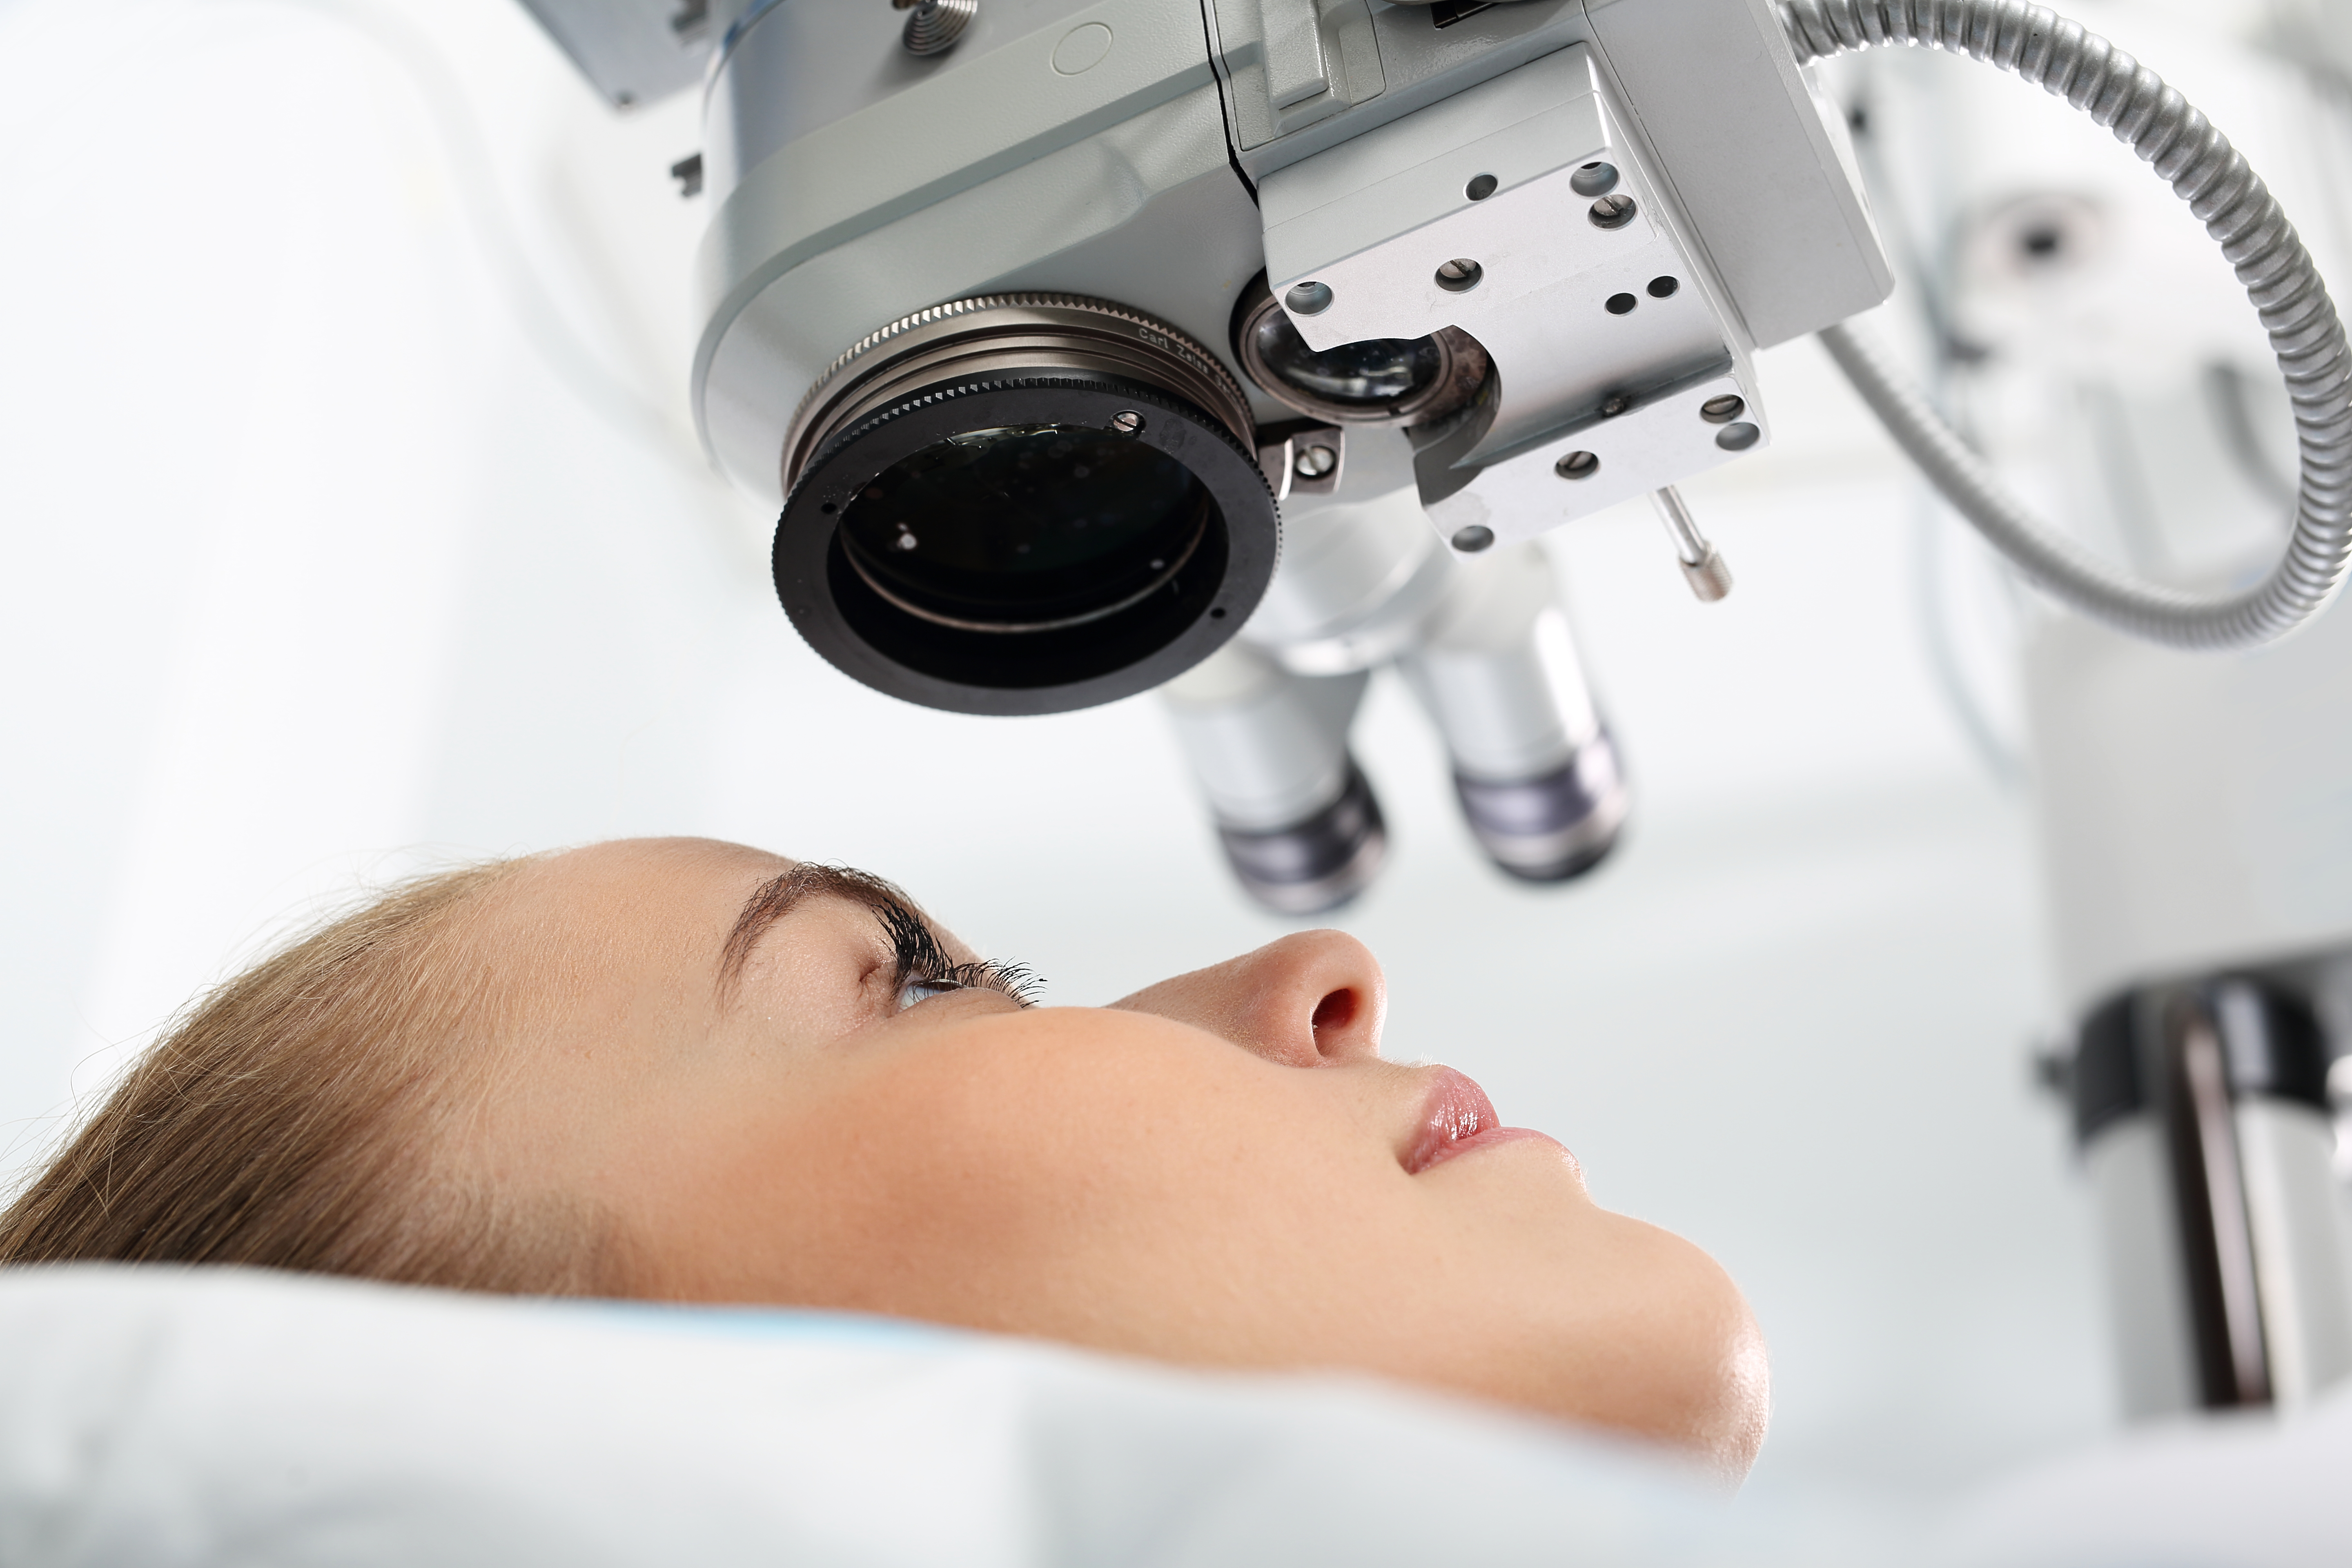 Eye Care in Oman: Be Proactive About Your Eyes